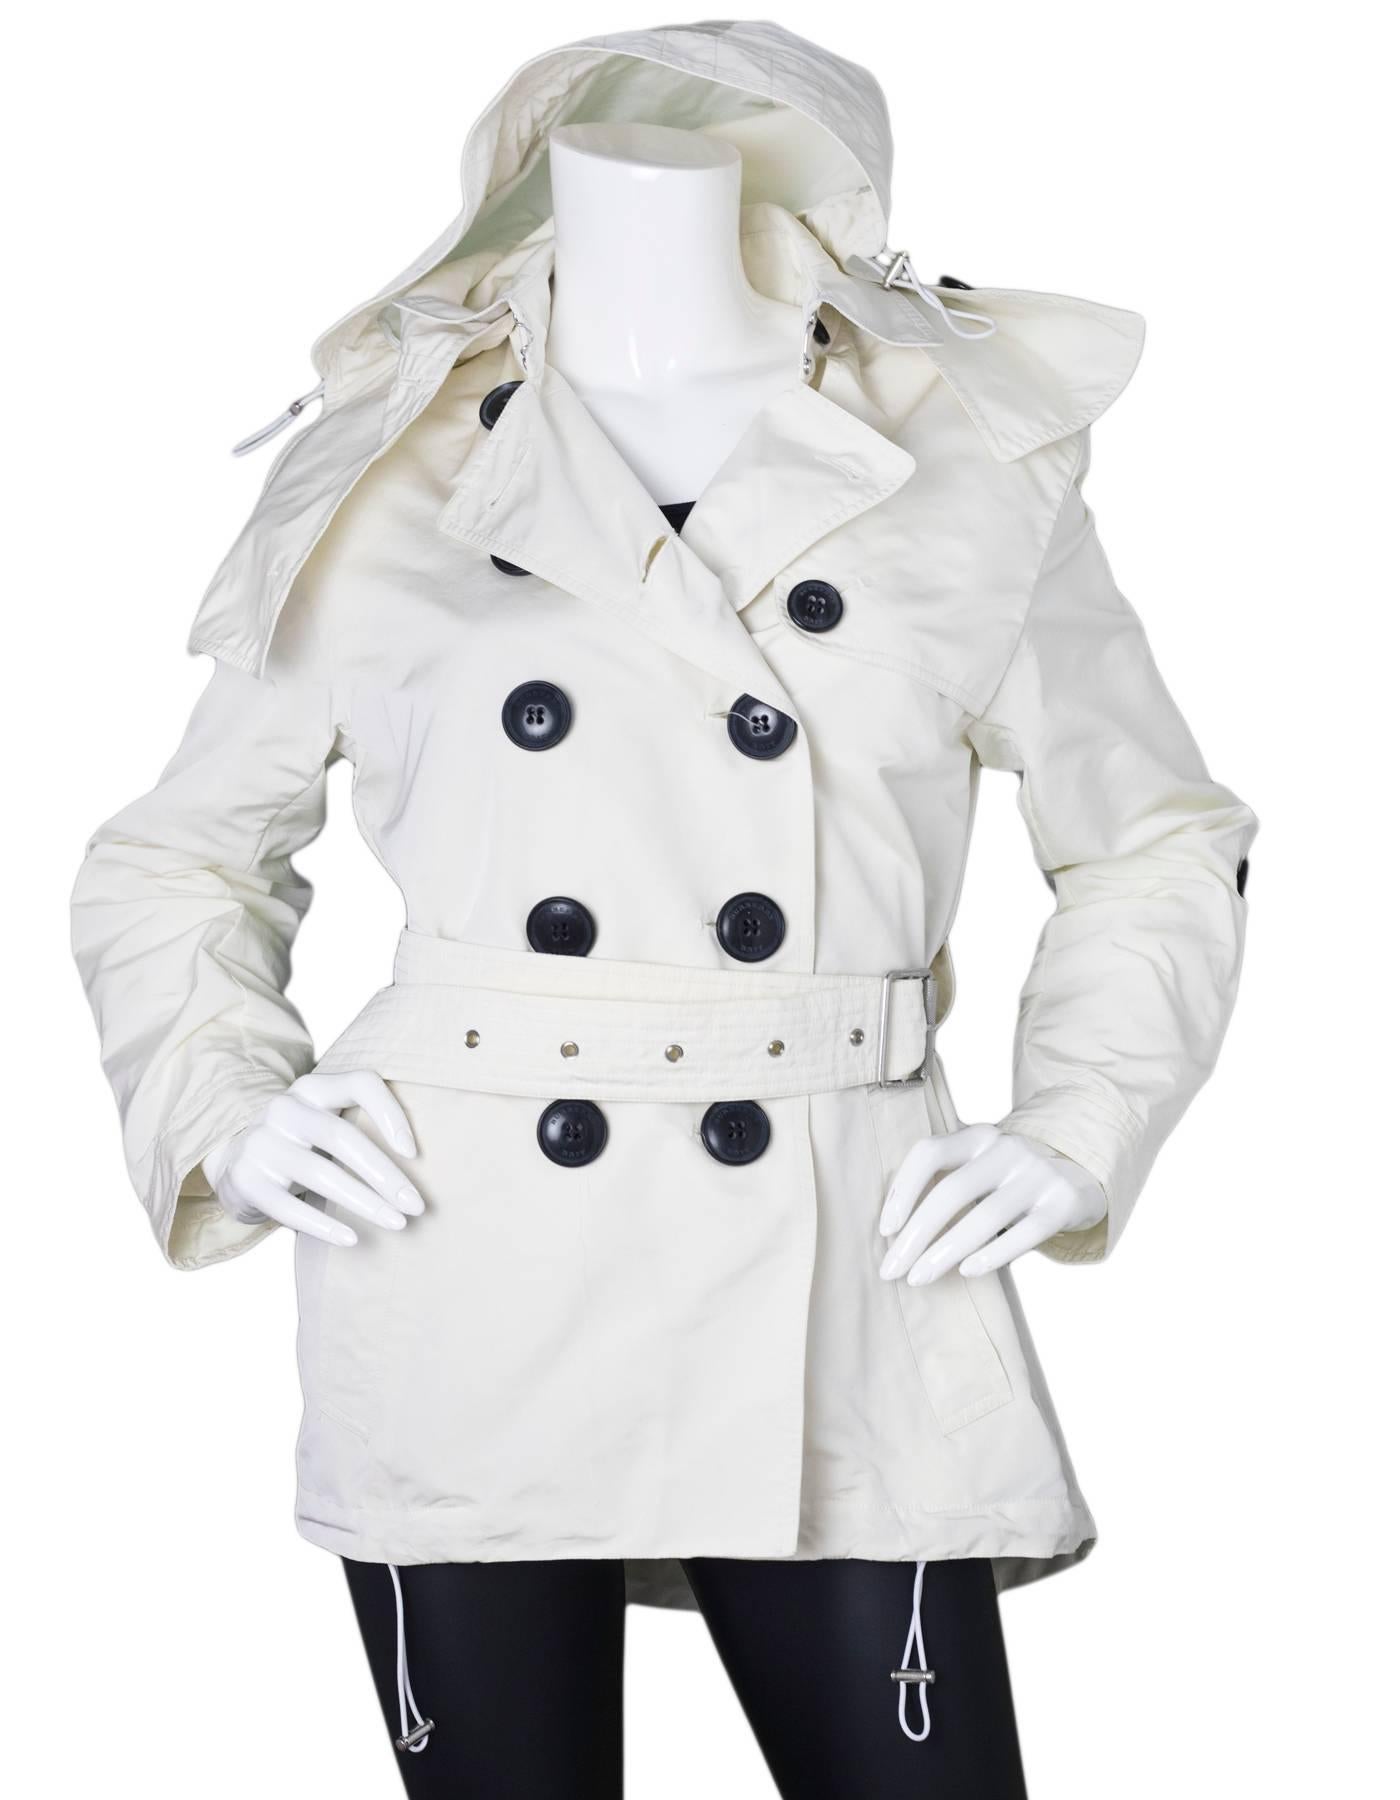 Burberry Brit Cream Knightsdale Hooded Trench Coat Sz 4

Made In: Italy
Color: Cream
Composition: 100% Polyester
Lining: None
Closure/Opening: Front double breast button closure
Exterior Pockets: Two hip pockets
Overall Condition: Excellent